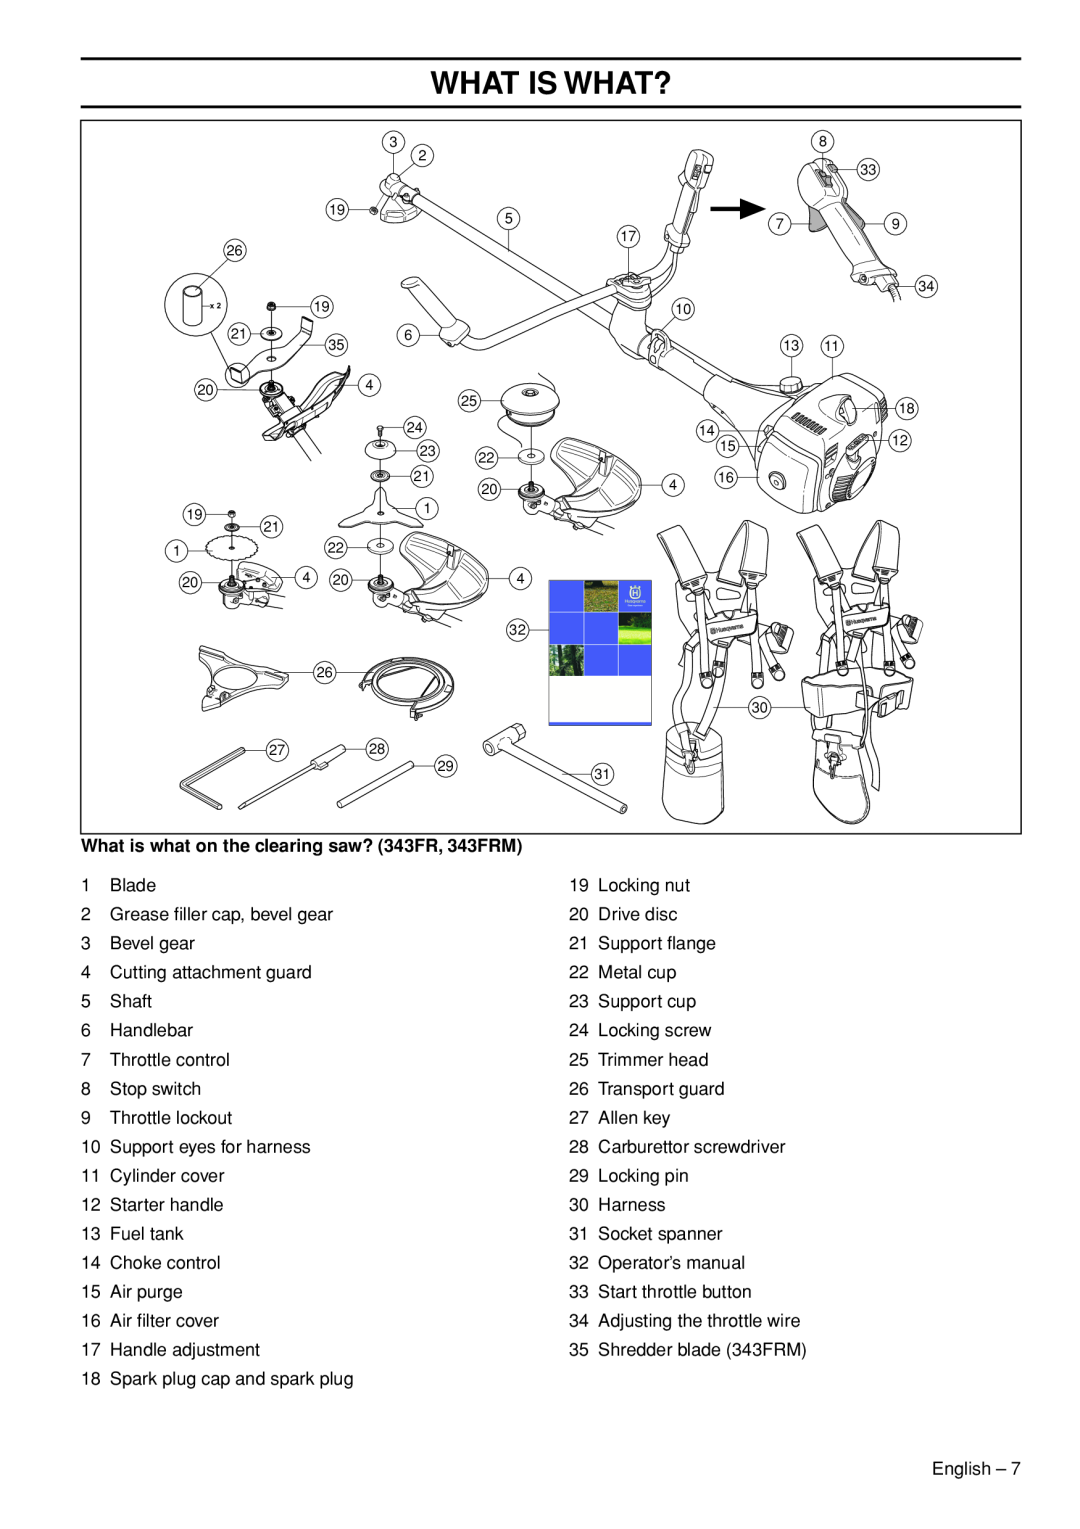 Husqvarna 335LX manual What is what on the clearing saw? 343FR, 343FRM, What Is What? 